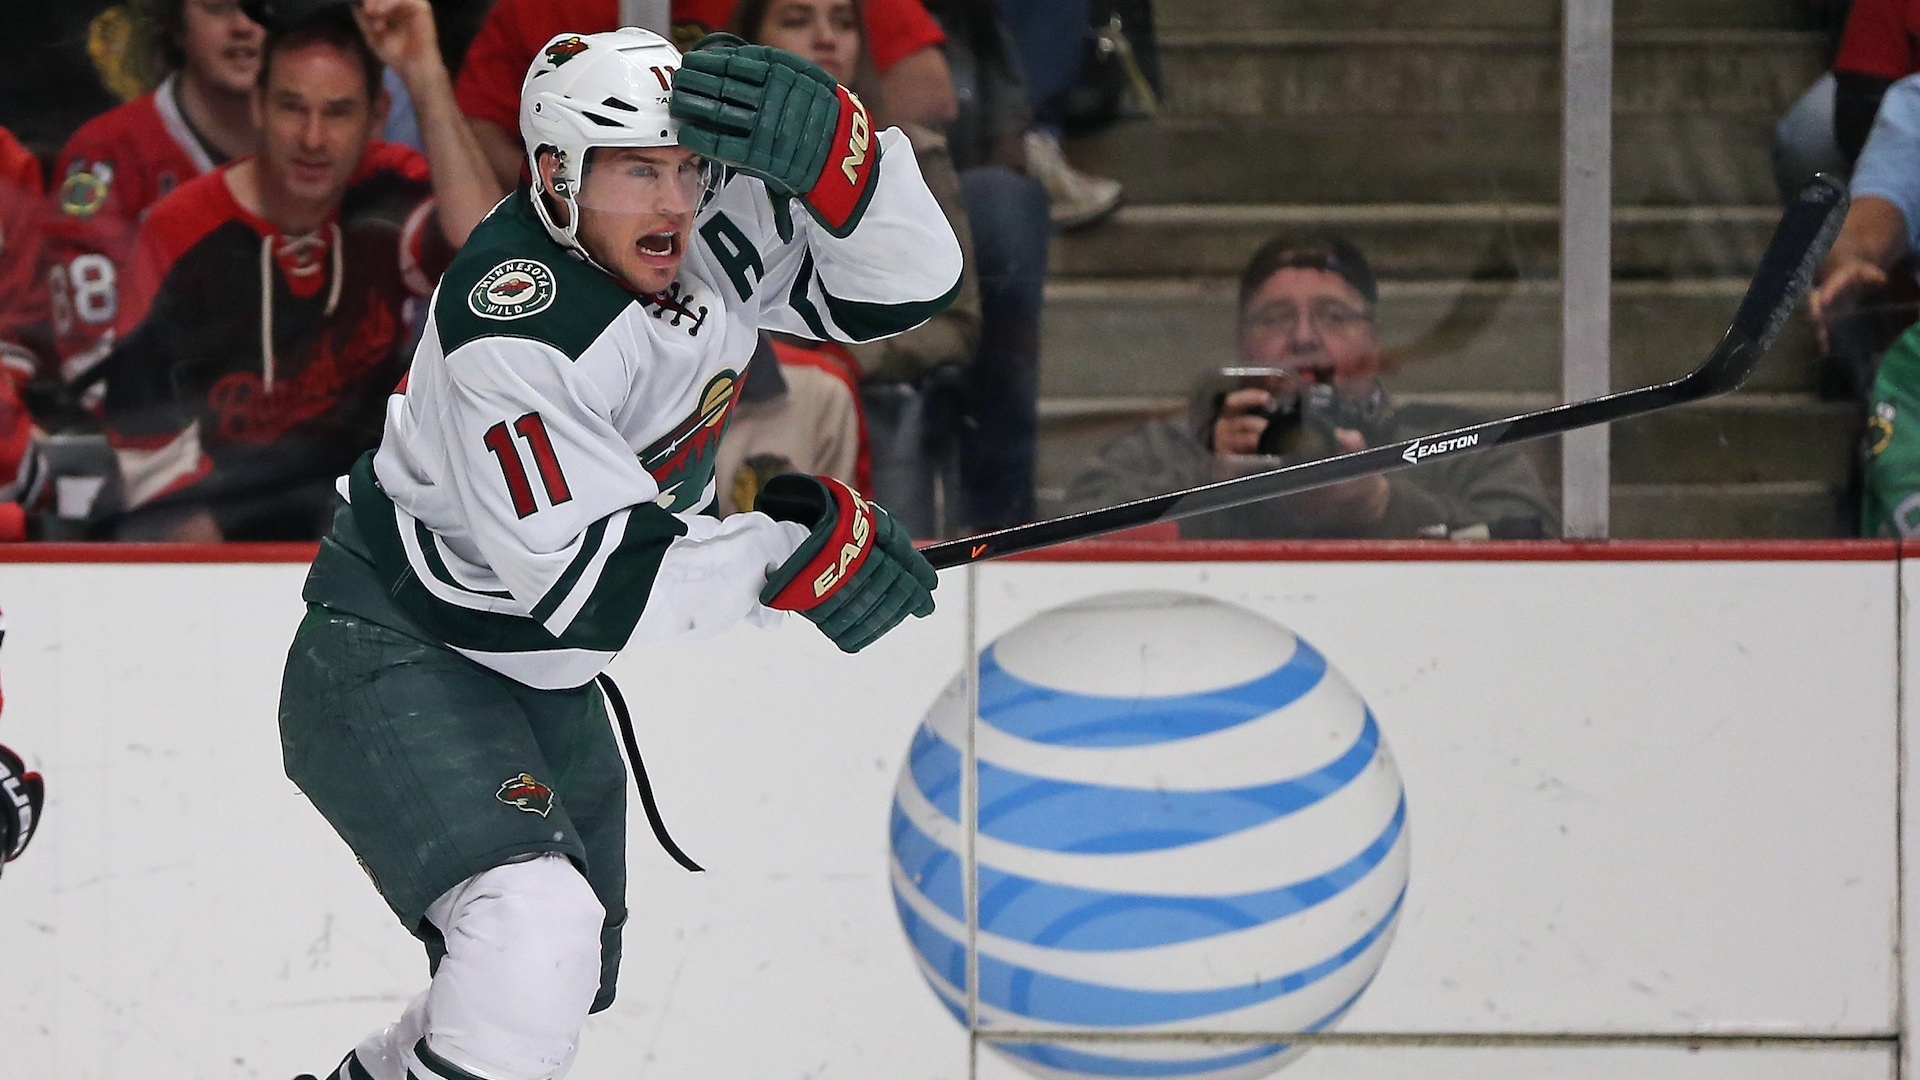 Wild's Player Zach Parise Picks Up Tooth after Taking a Puck to ...